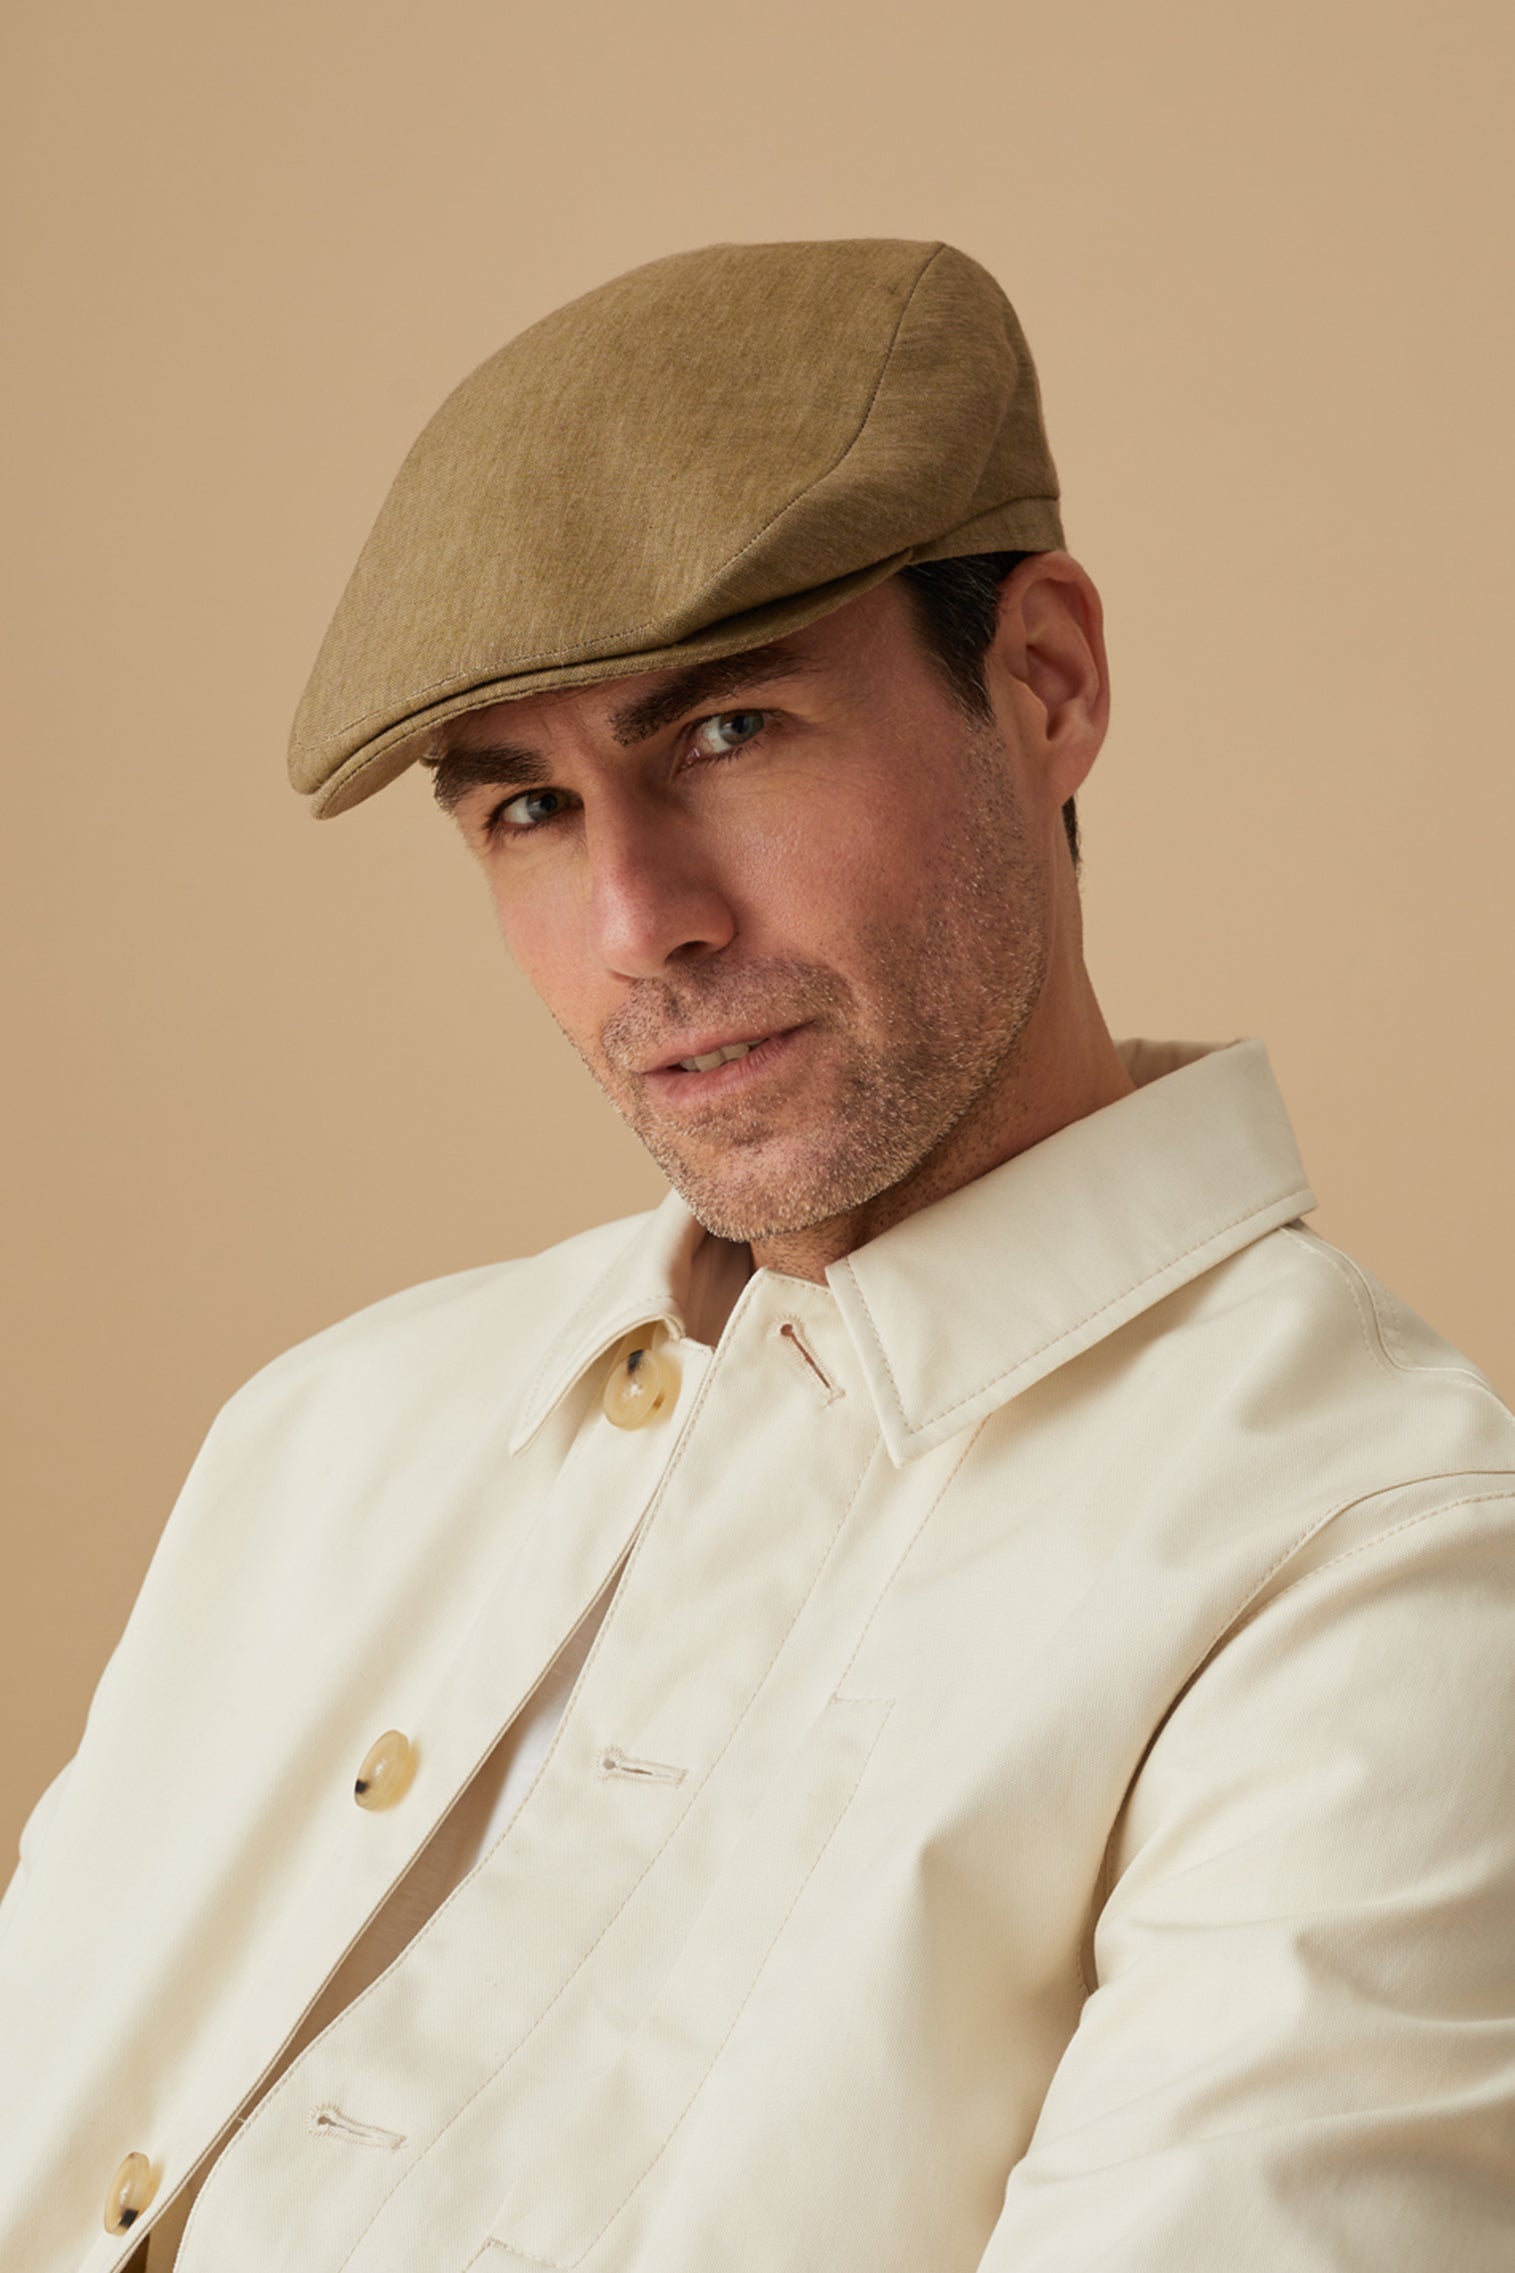 Grosvenor Olive Flat Cap - Products - Lock & Co. Hatters London UK